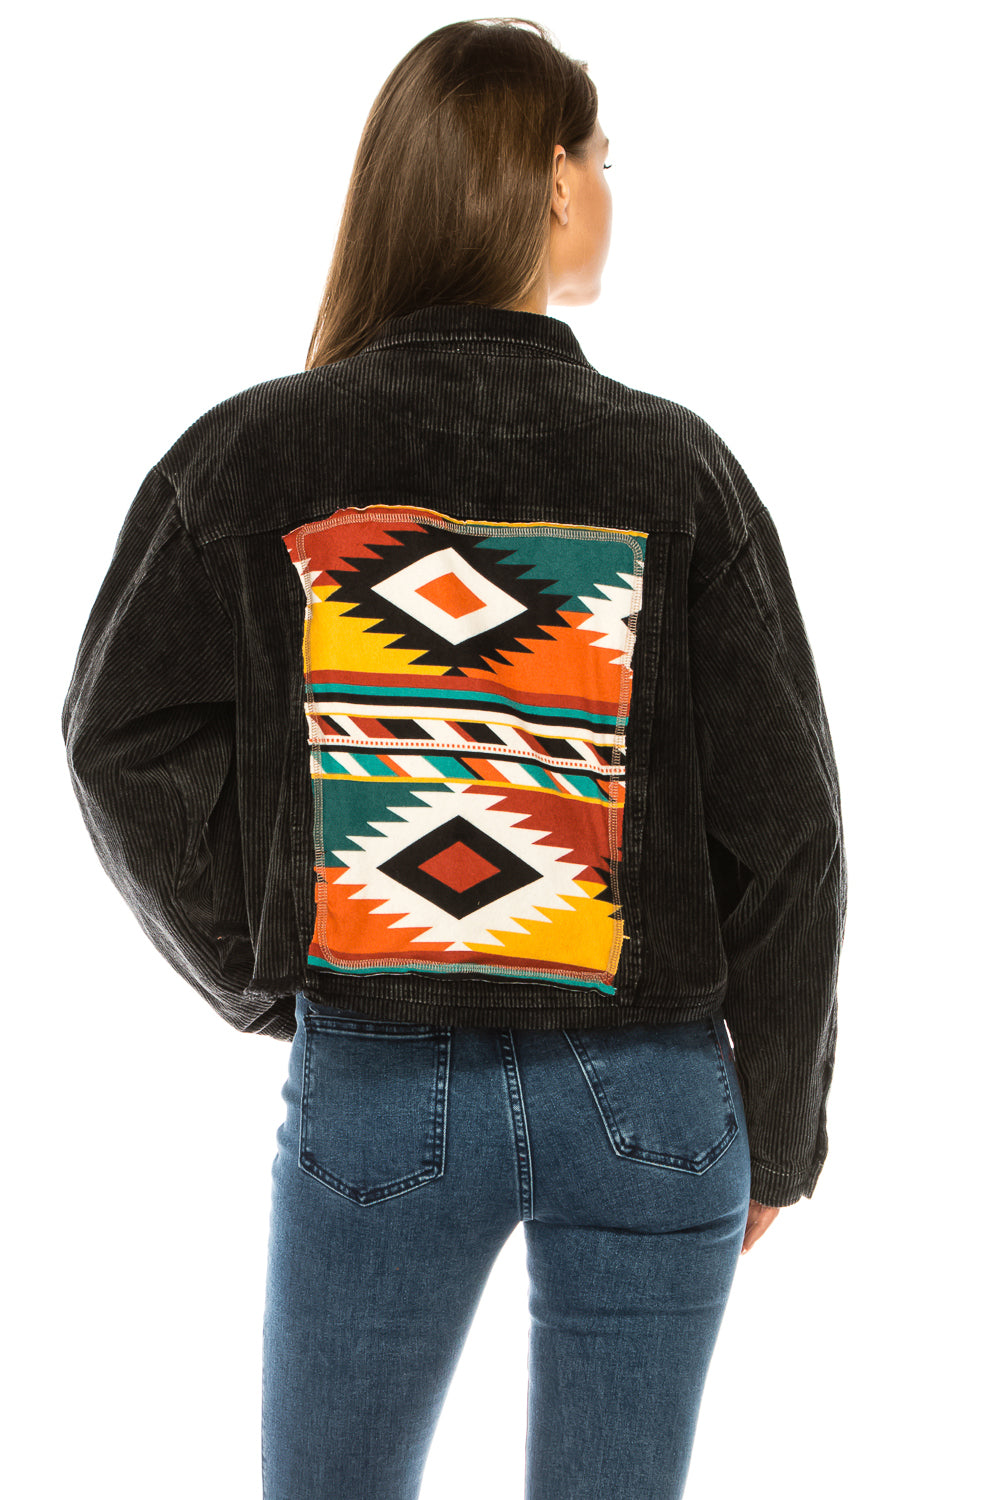 CROPPED CORDUROY JACKET WITH AZTEC BACK PATCH - Trailsclothing.com